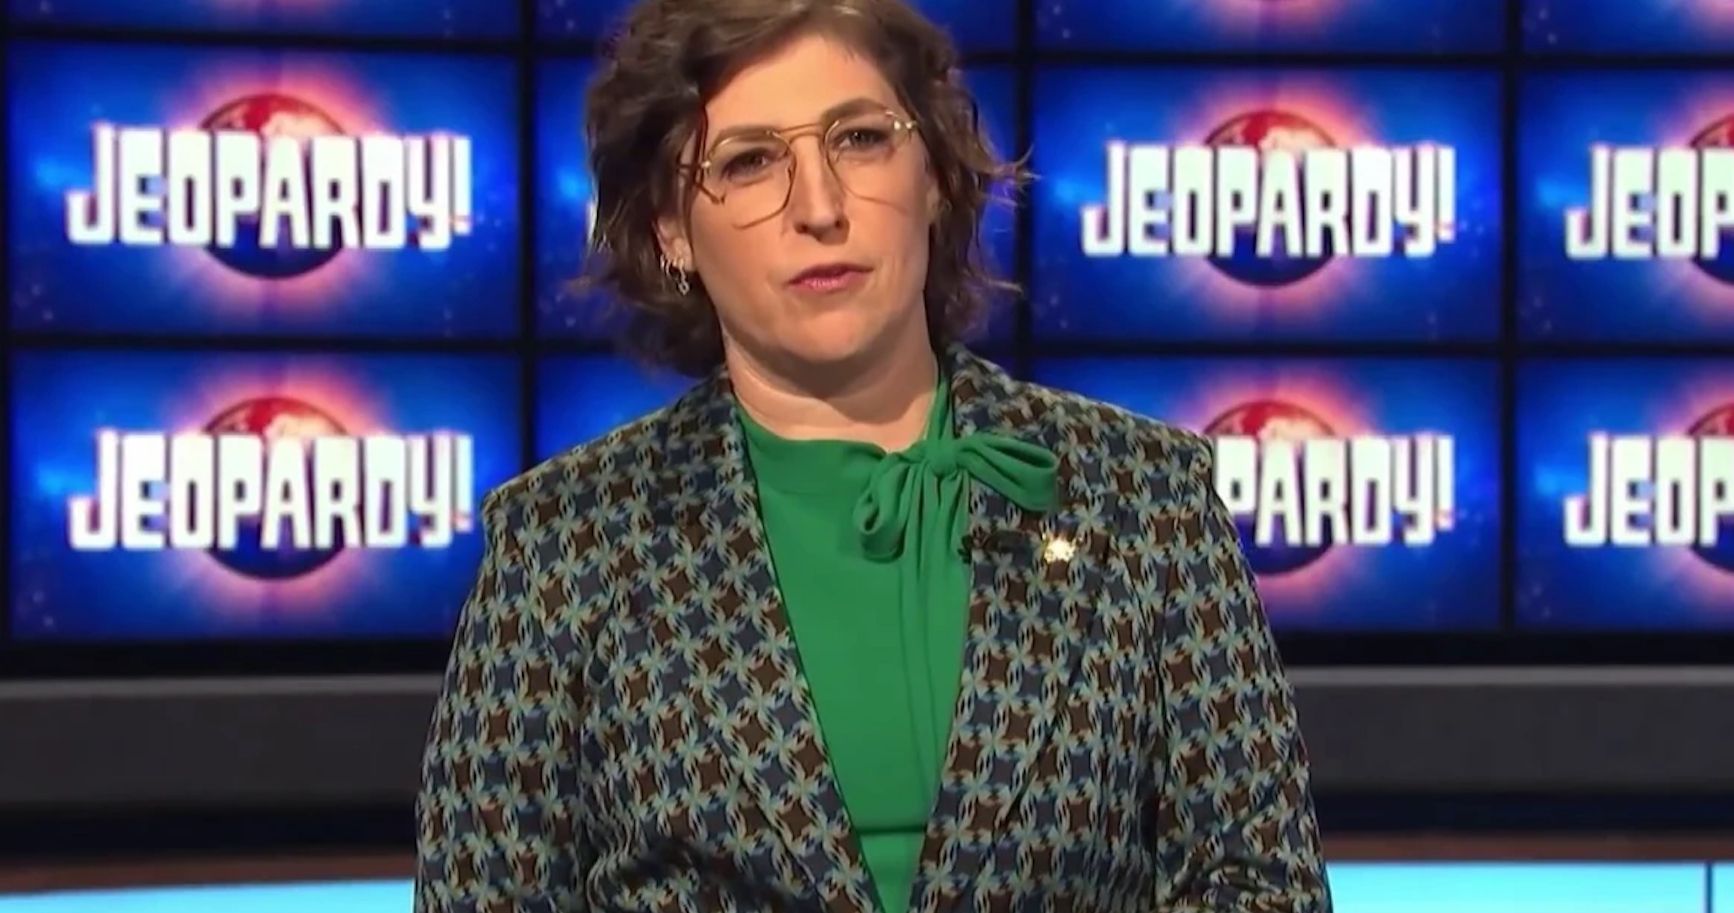 Jeopardy! Brings in Mayim Bialik as Temporary Host Following Mike Richards' Exit